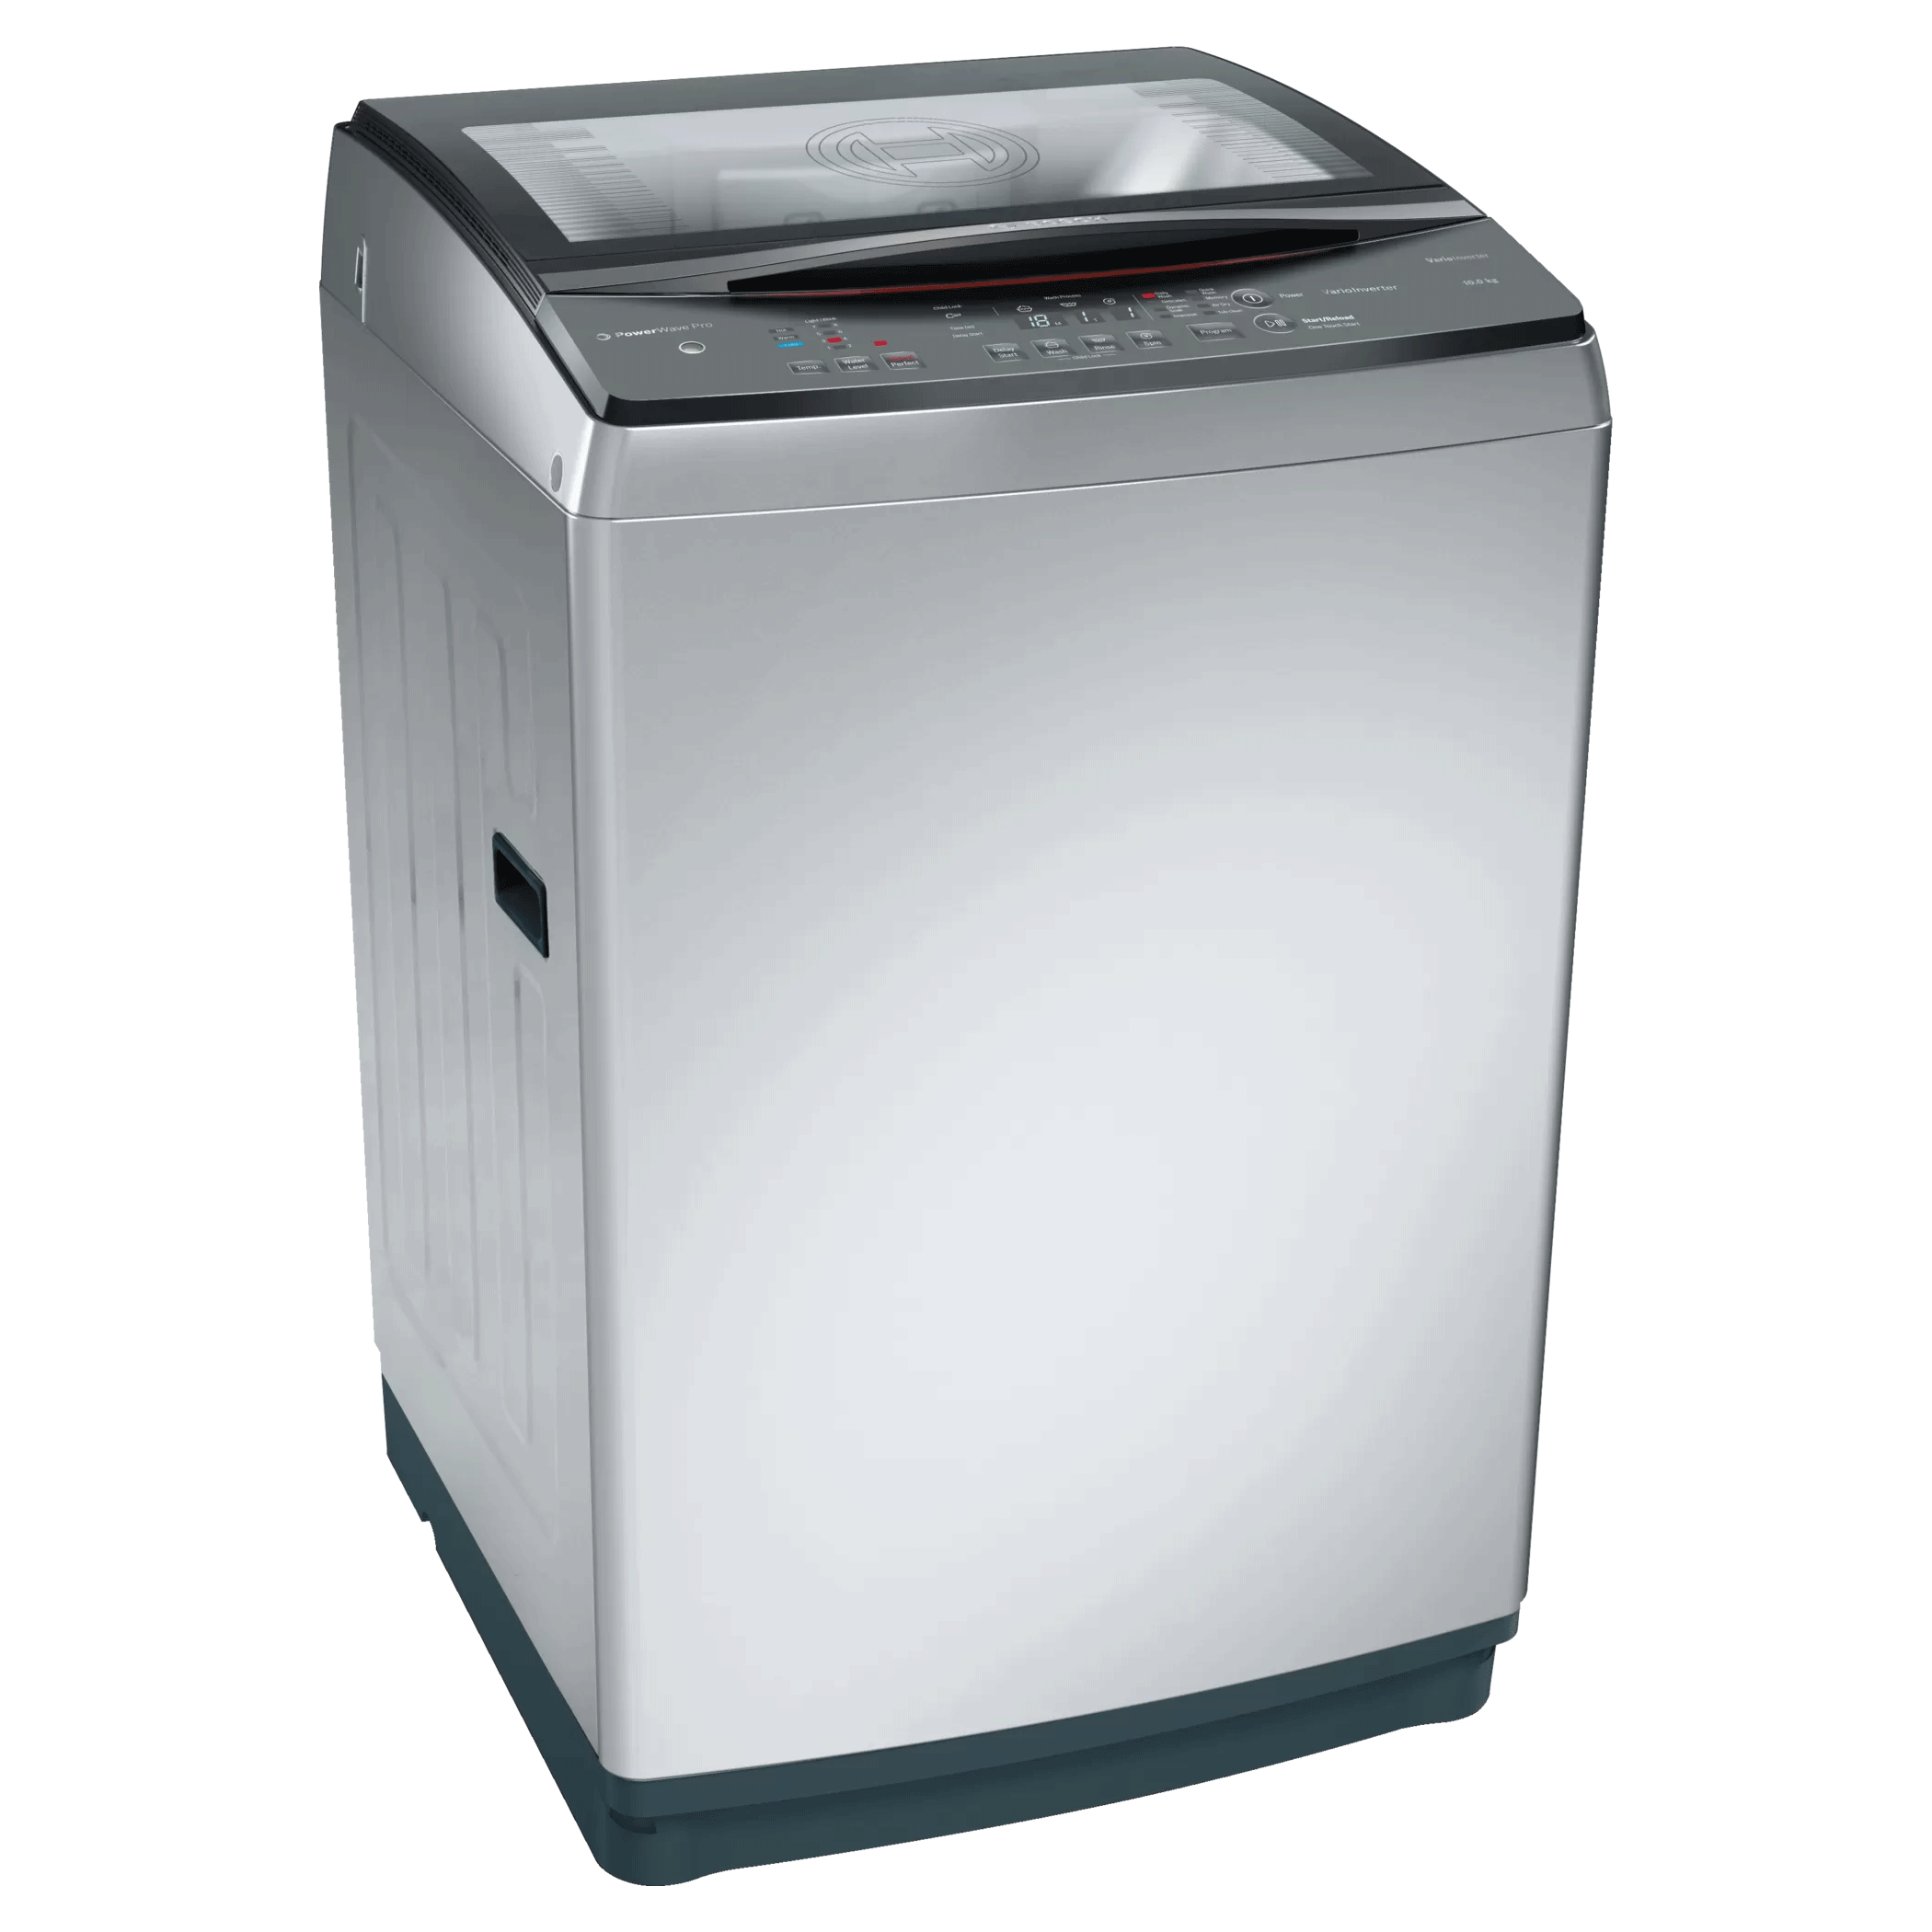 Bosch Serie 4 10 kg Fully Automatic Top Load Washing Machine (WOA106S2IN, Silver)_1